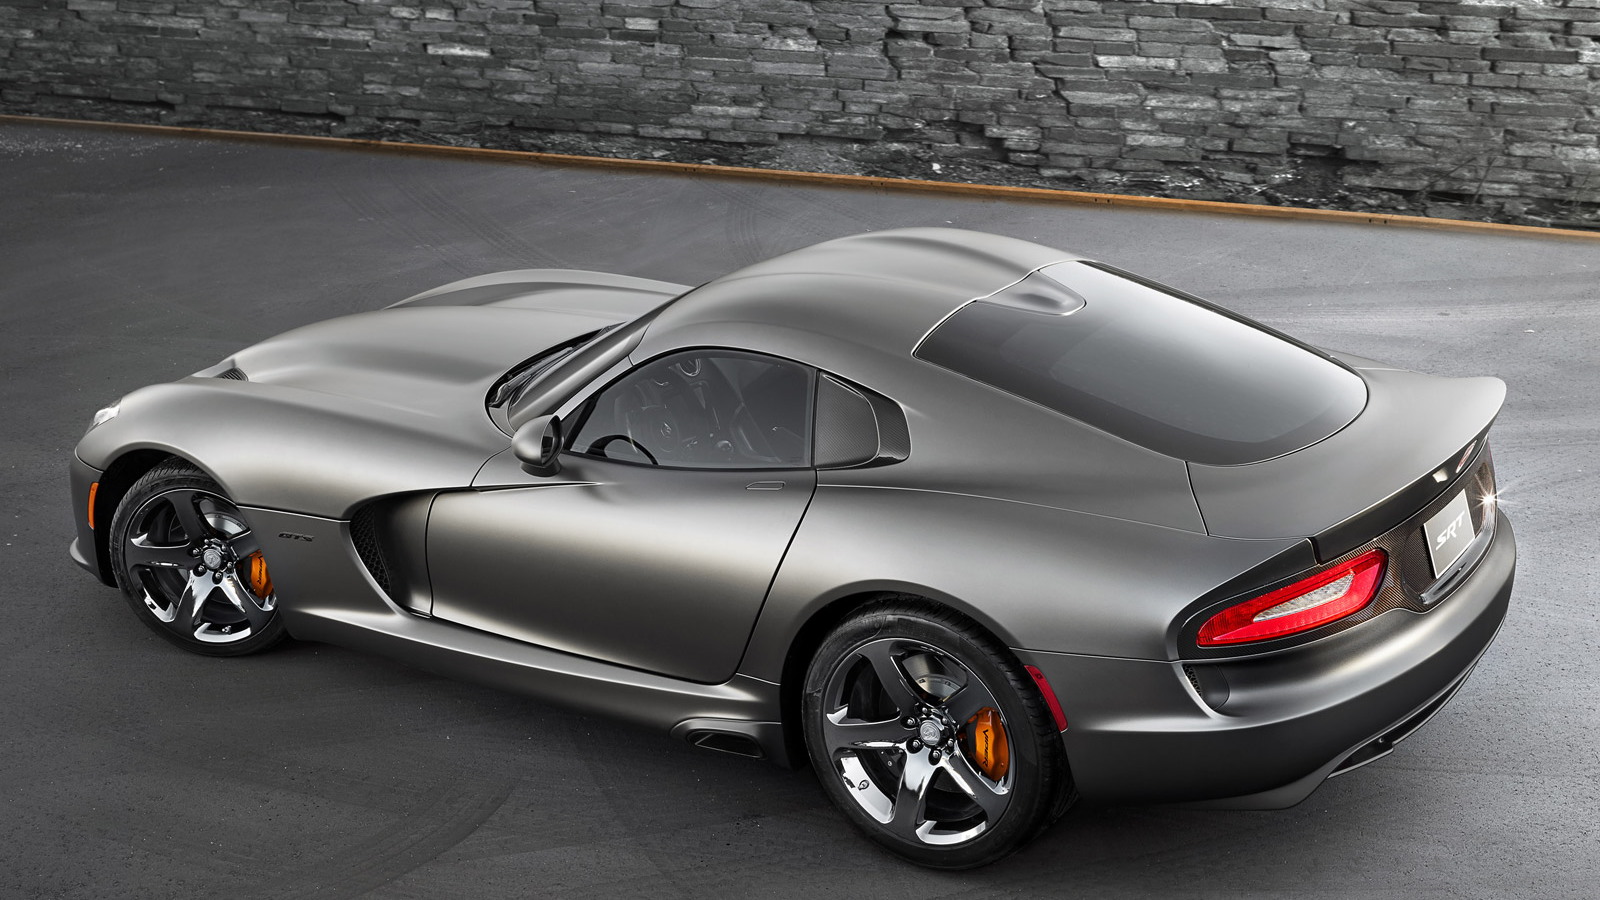 2014 SRT Viper GTS Anodized Carbon Special Edition Package